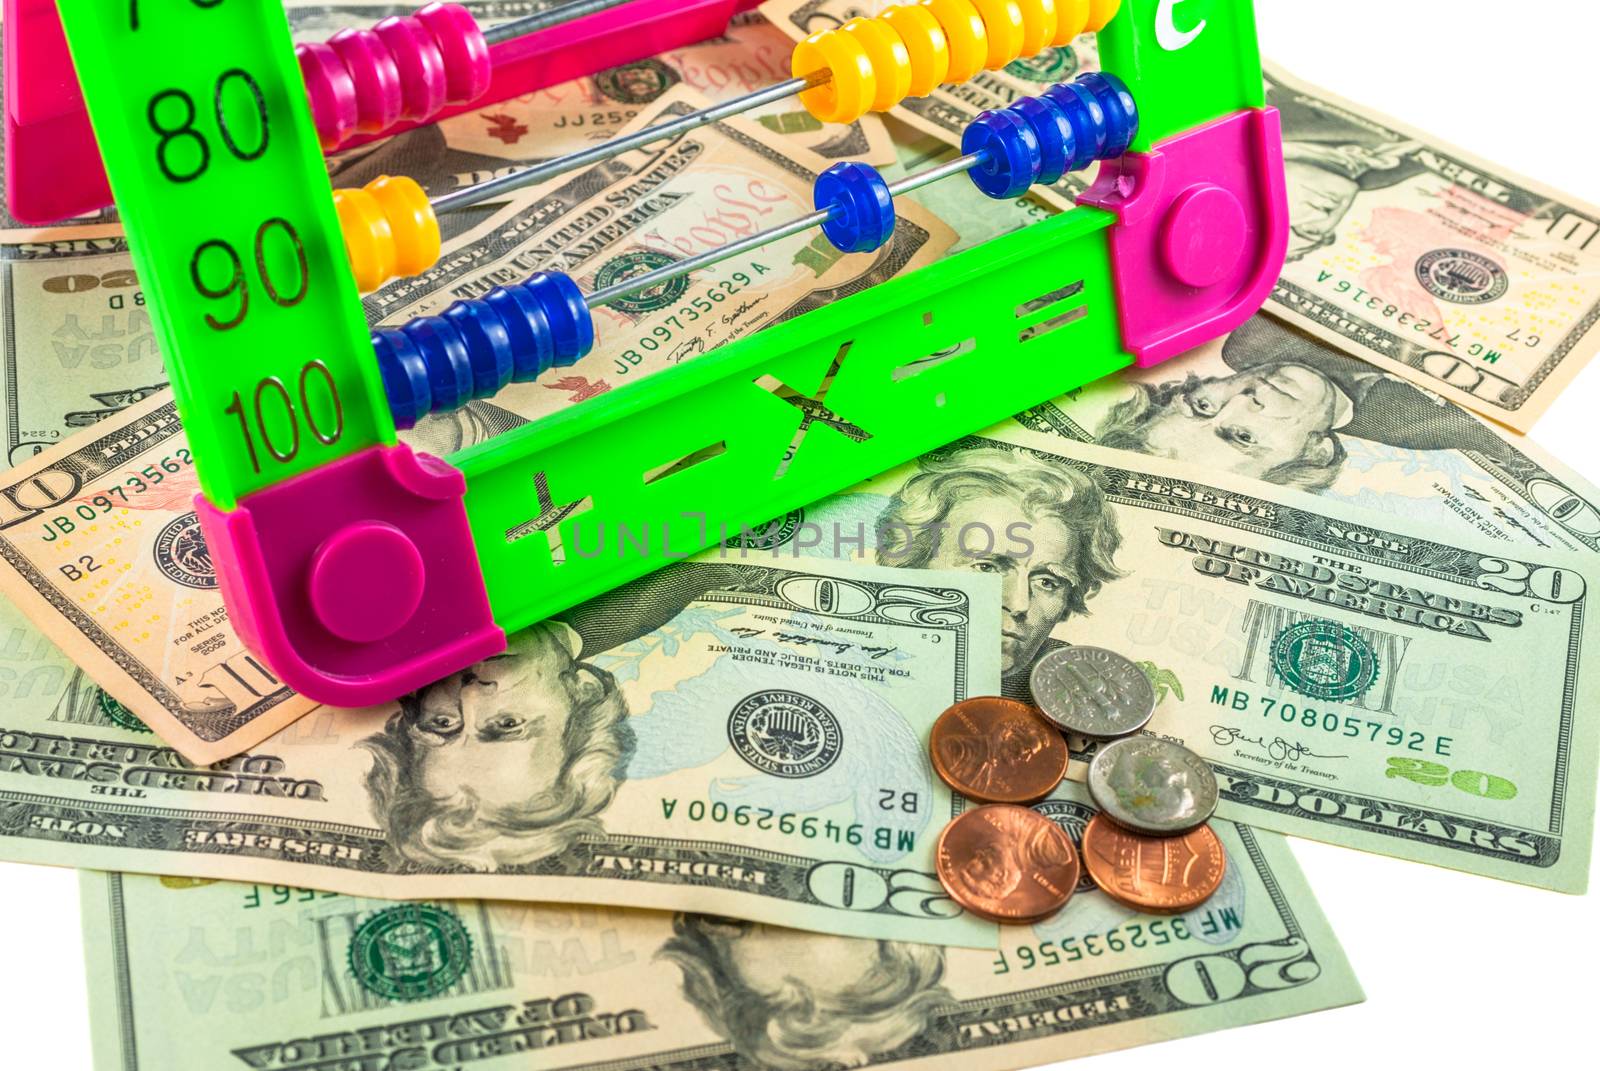 american dollars banknotes by the side of a colorful abacus